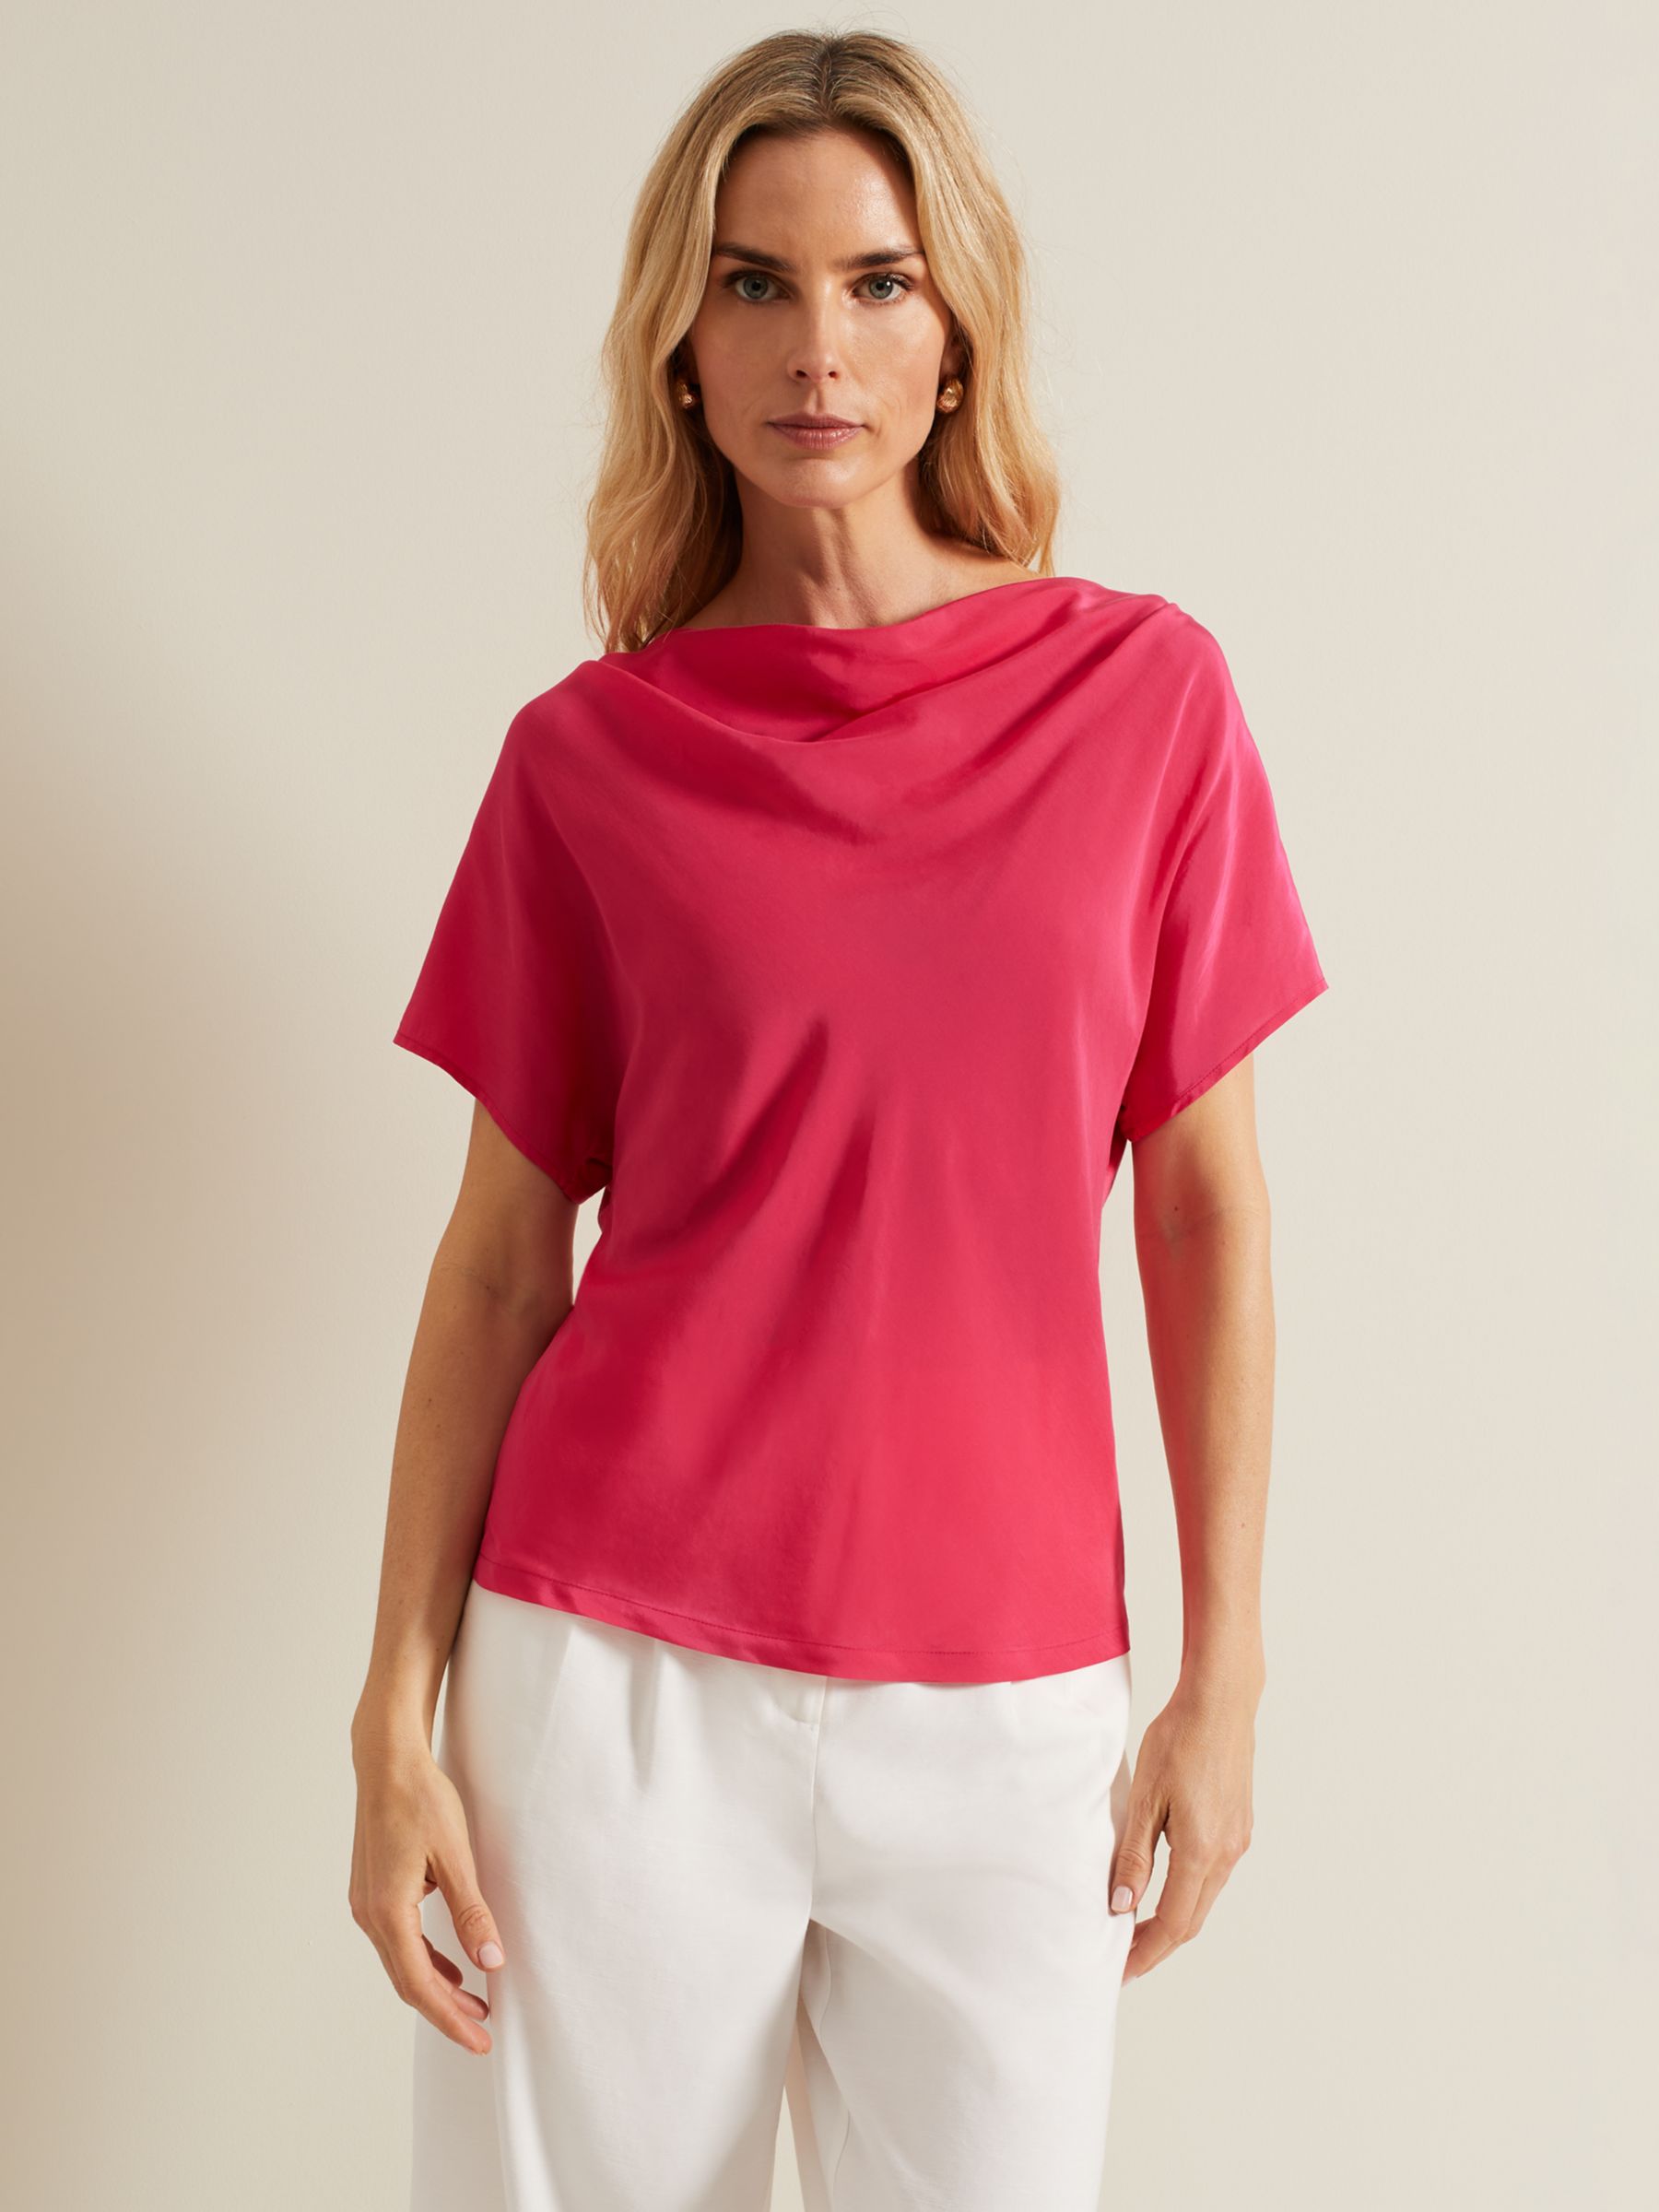 Phase Eight Cheryl Cowl Neck Top, Pink, 8